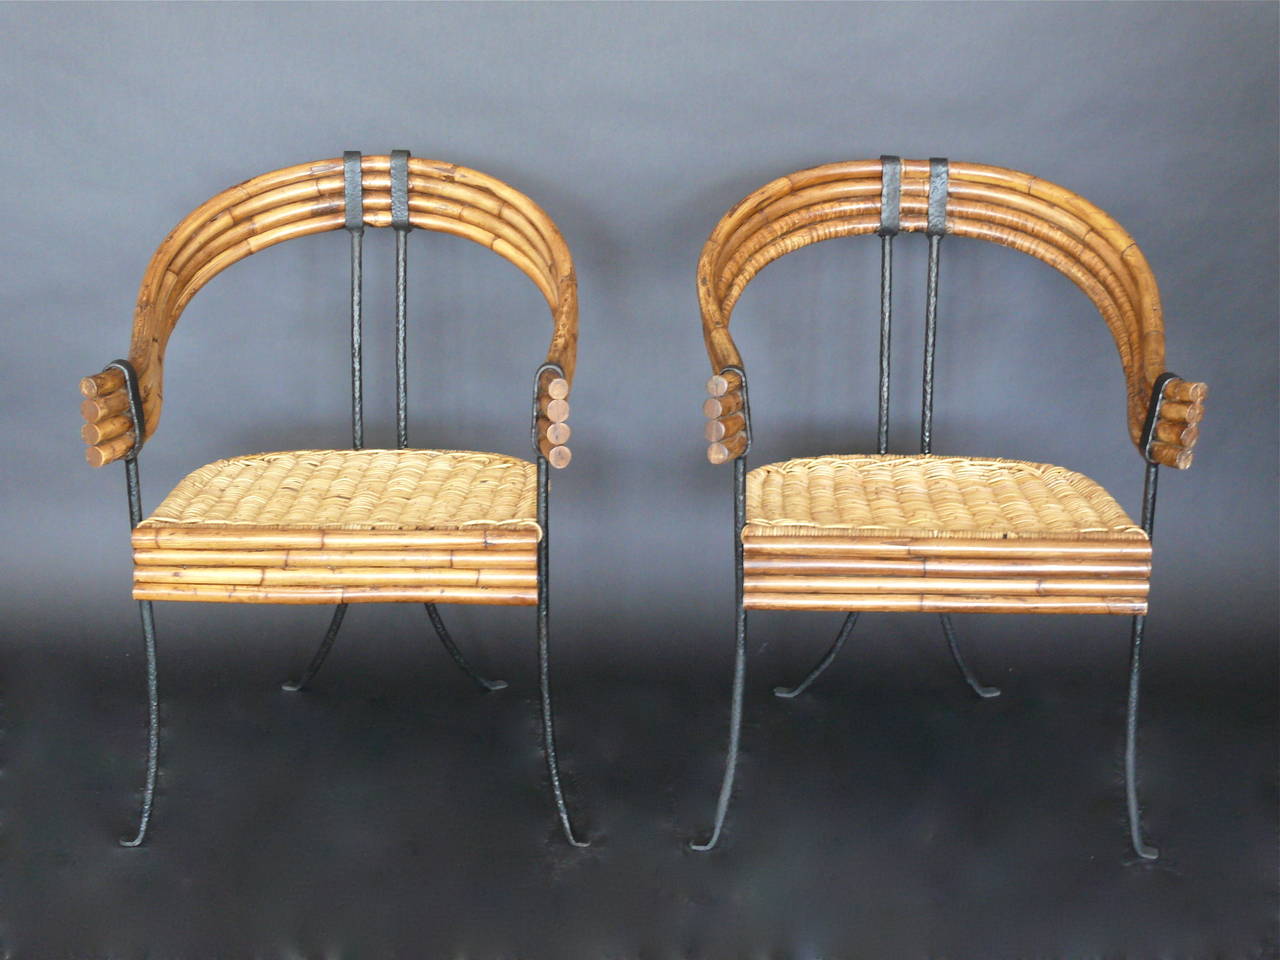 Whimsical set of bamboo and iron chairs. Iron frame with continuous bamboo on backrest and arms. Rattan seat in excellent condition. Priced as a pair.